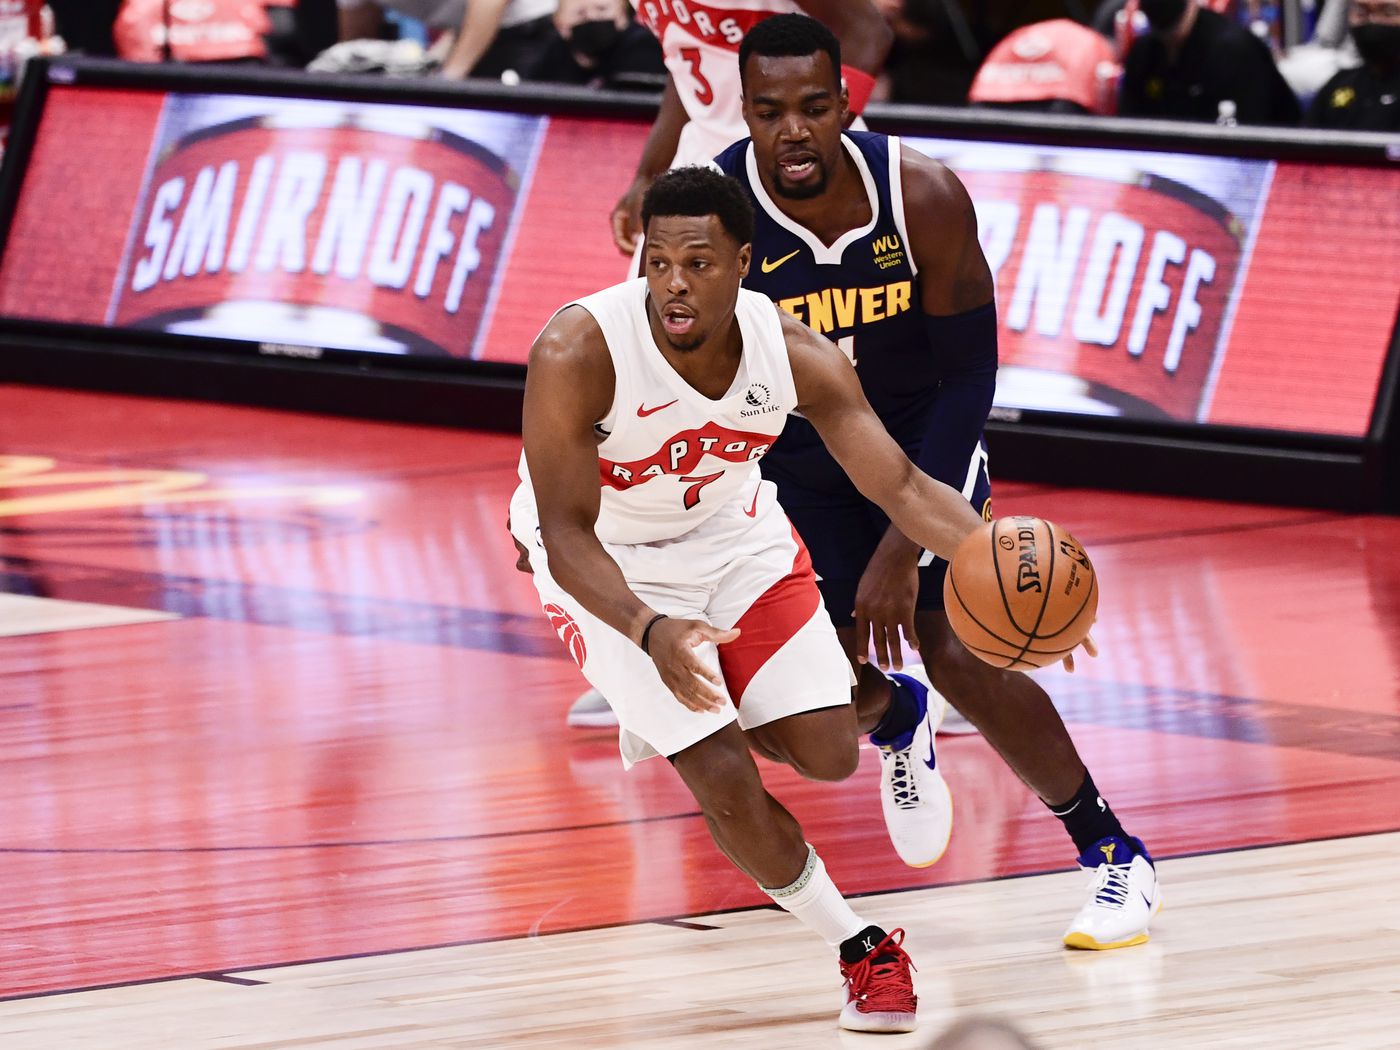 Kyle lowry trade proposals, buyout options, and biggest deadline needs. 